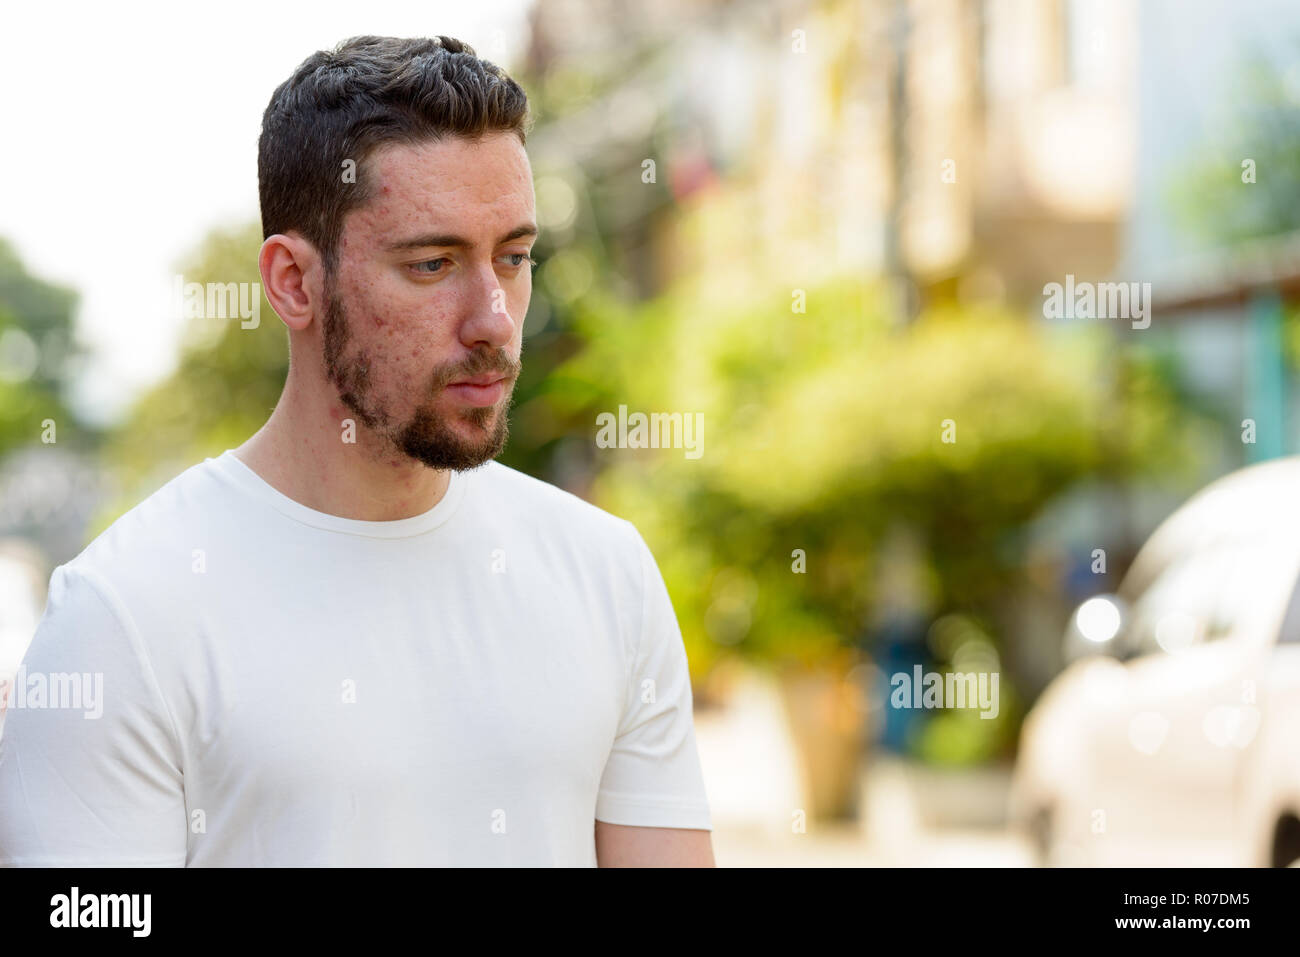 Portrait of young thoughtful man looking down outdoors Stock Photo